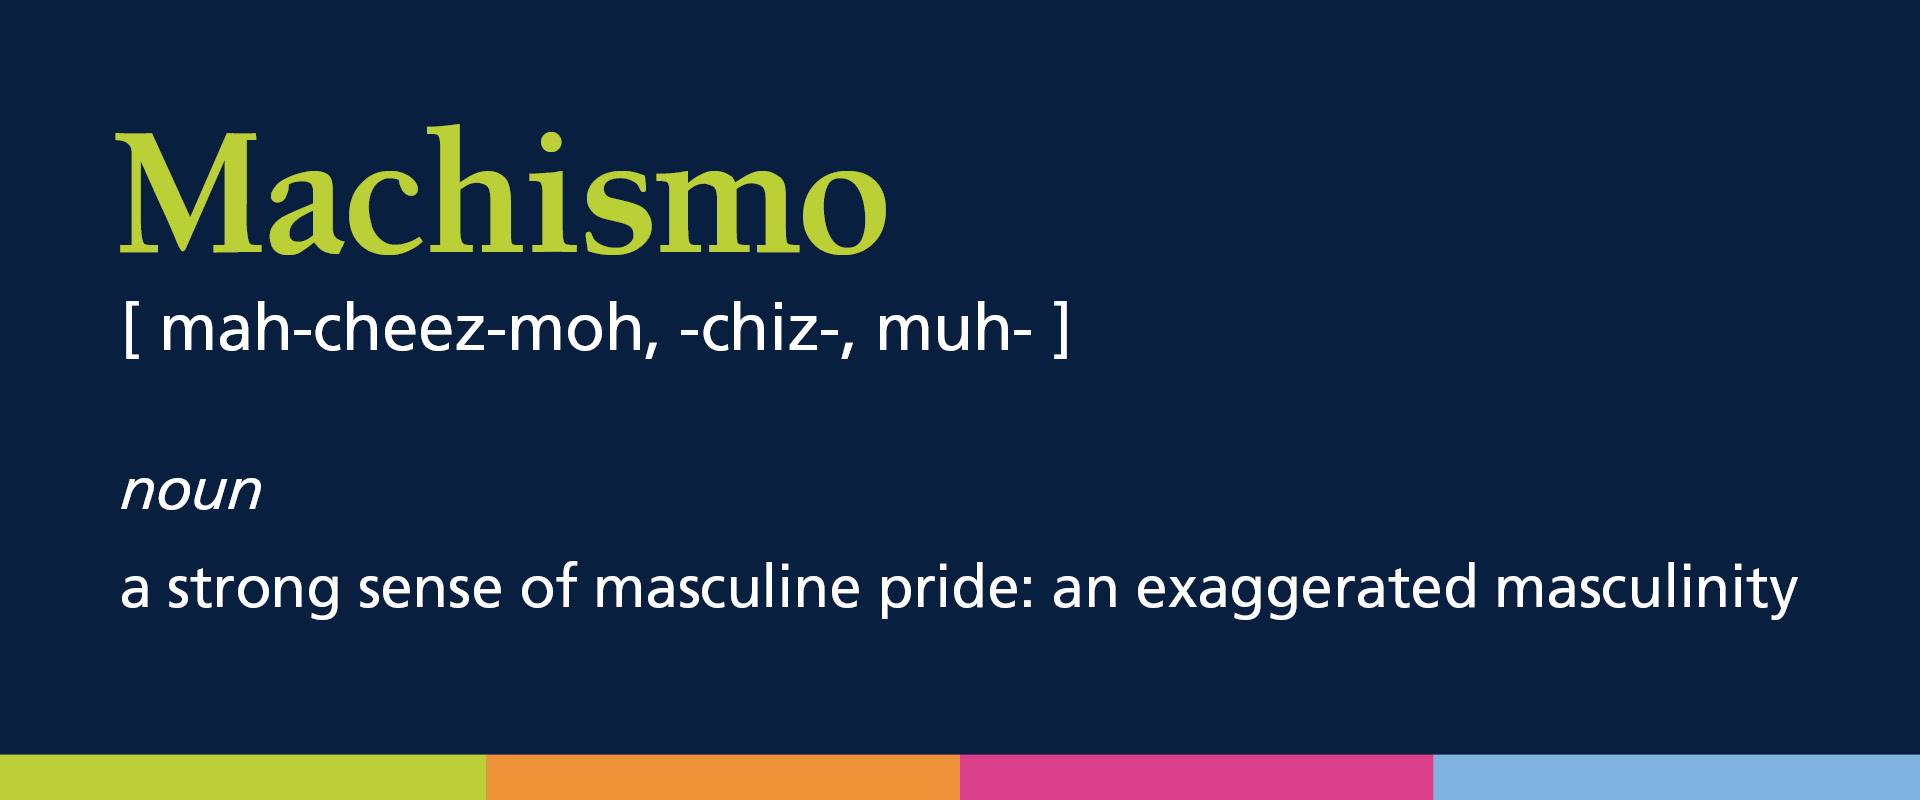 Machismo [ mah-cheez-moh, -chiz-, muh- ]
noun
a strong sense of masculine pride; an exaggerated masculinity